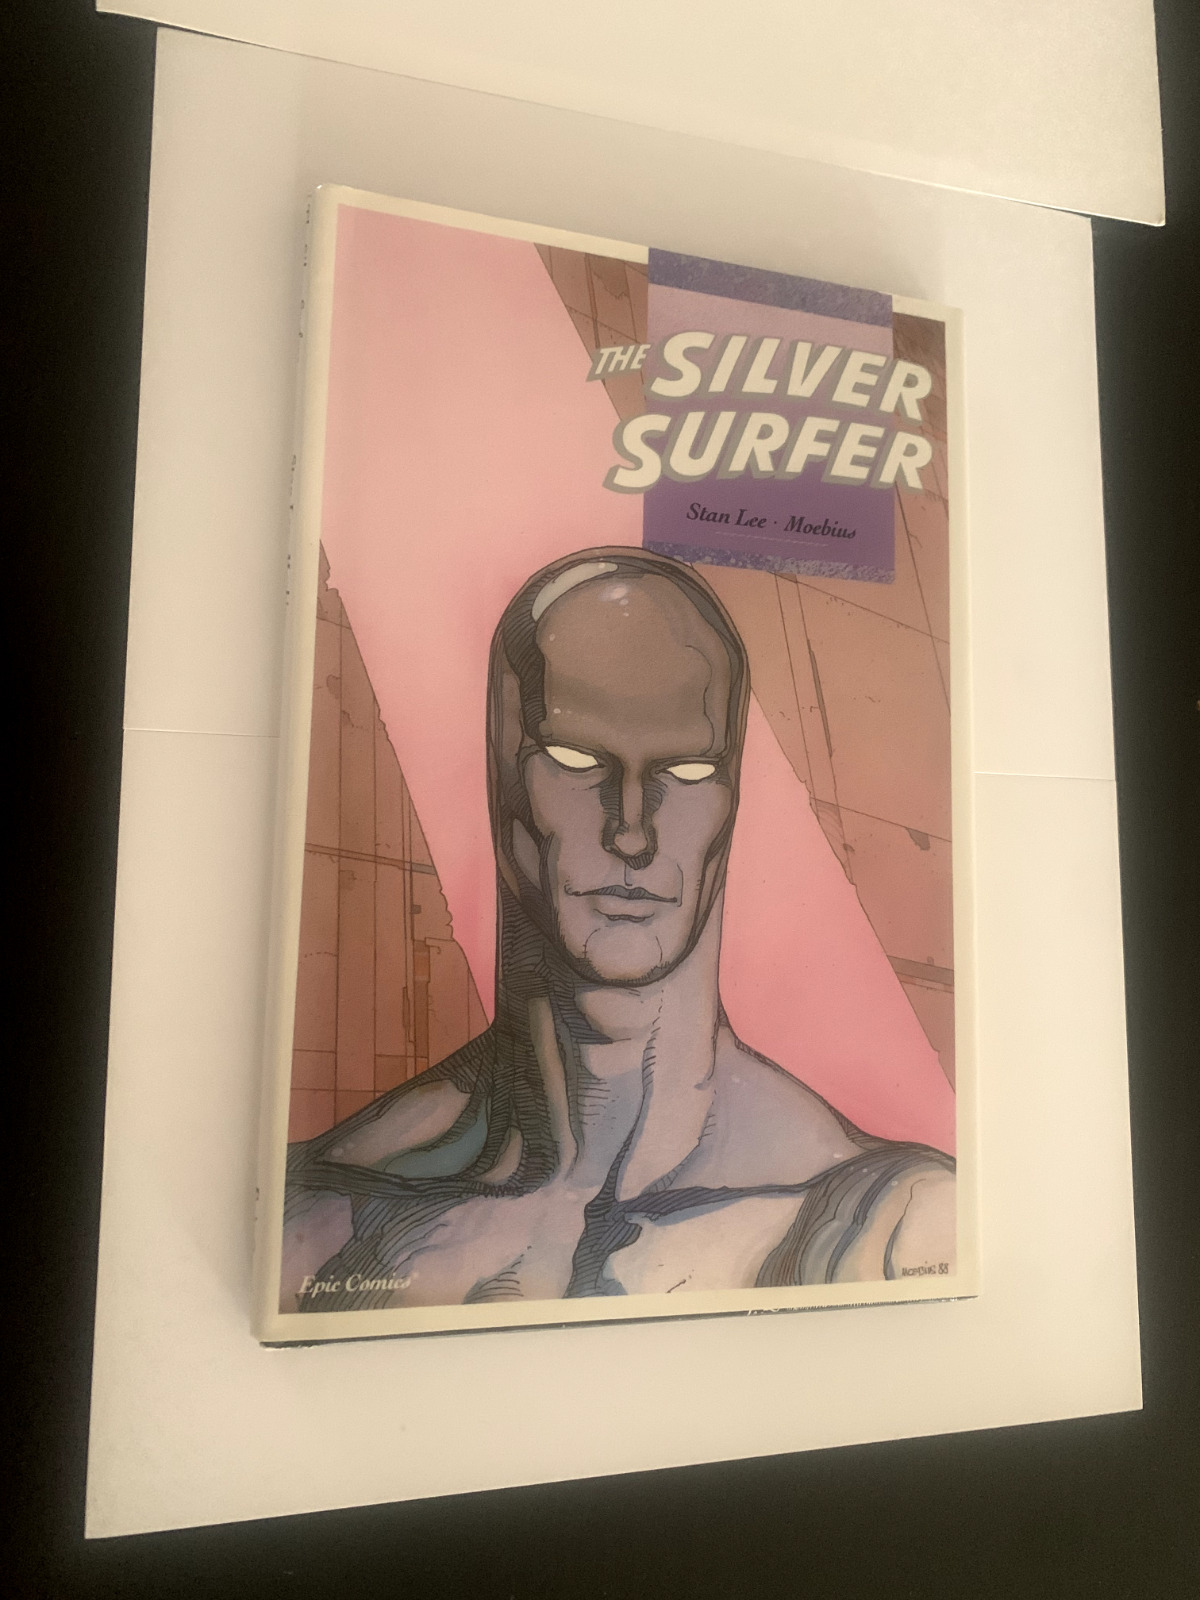 The Silver Surfer Parable Hardcover - Marvel Comics (1988) - Stan Lee - Moebius